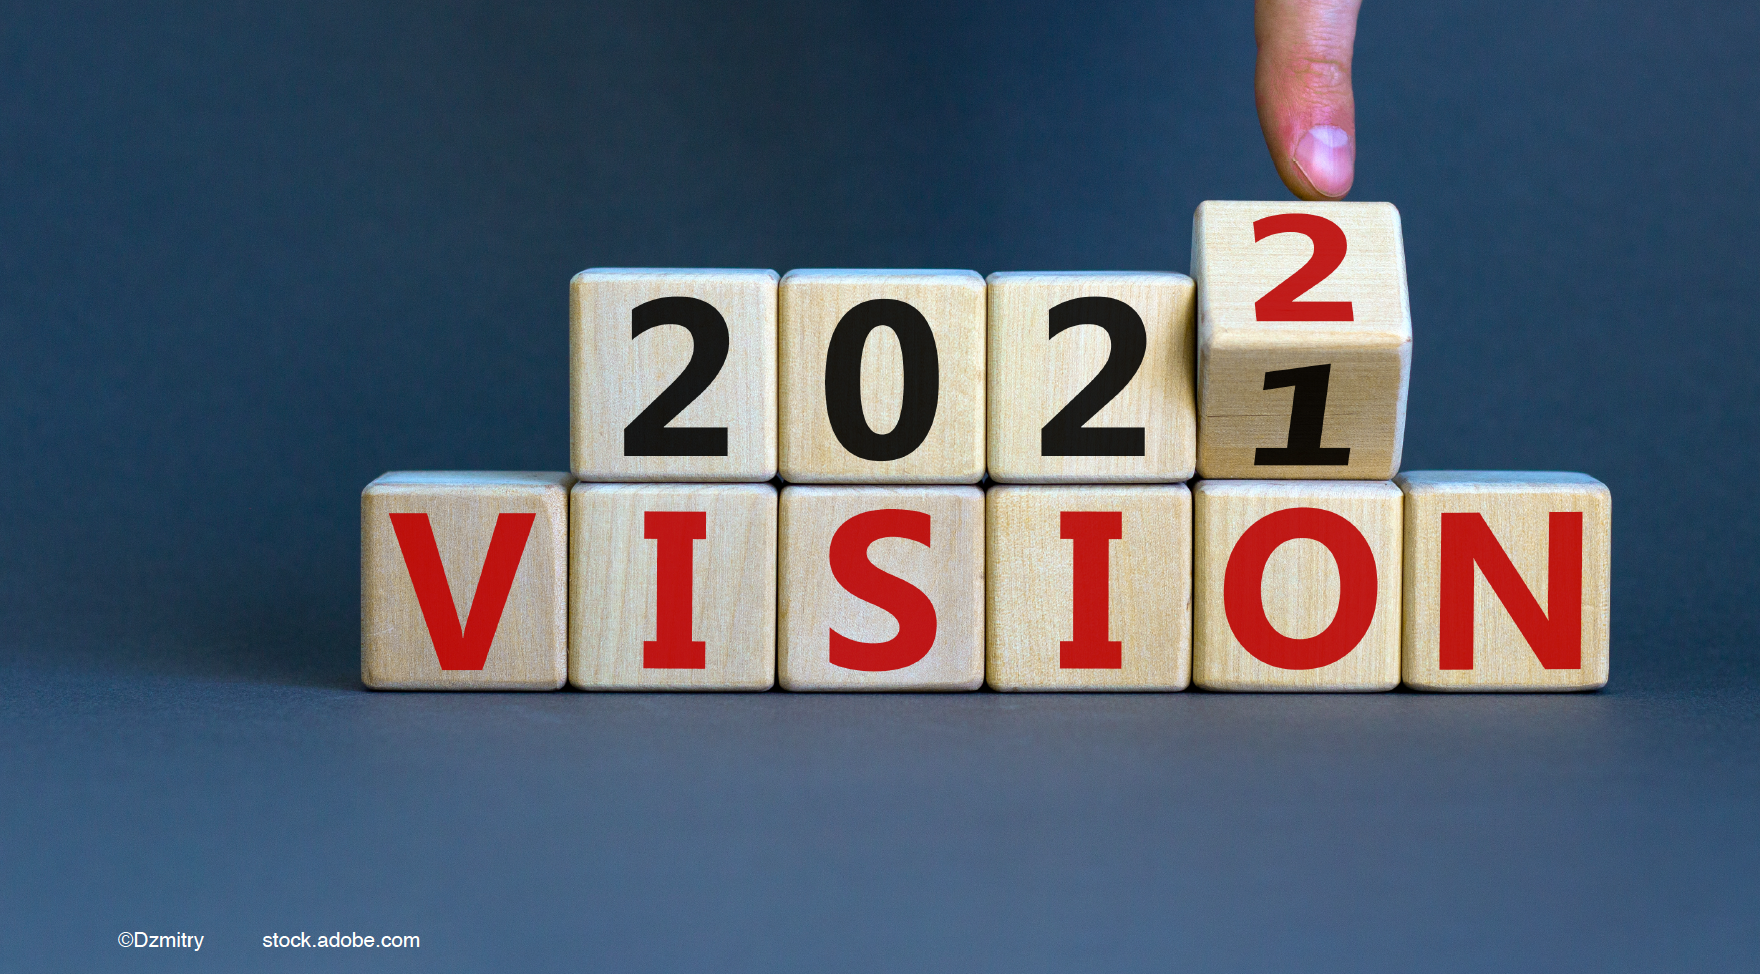 Dr. Mali's top 5 predictions for ophthalmology in 2022